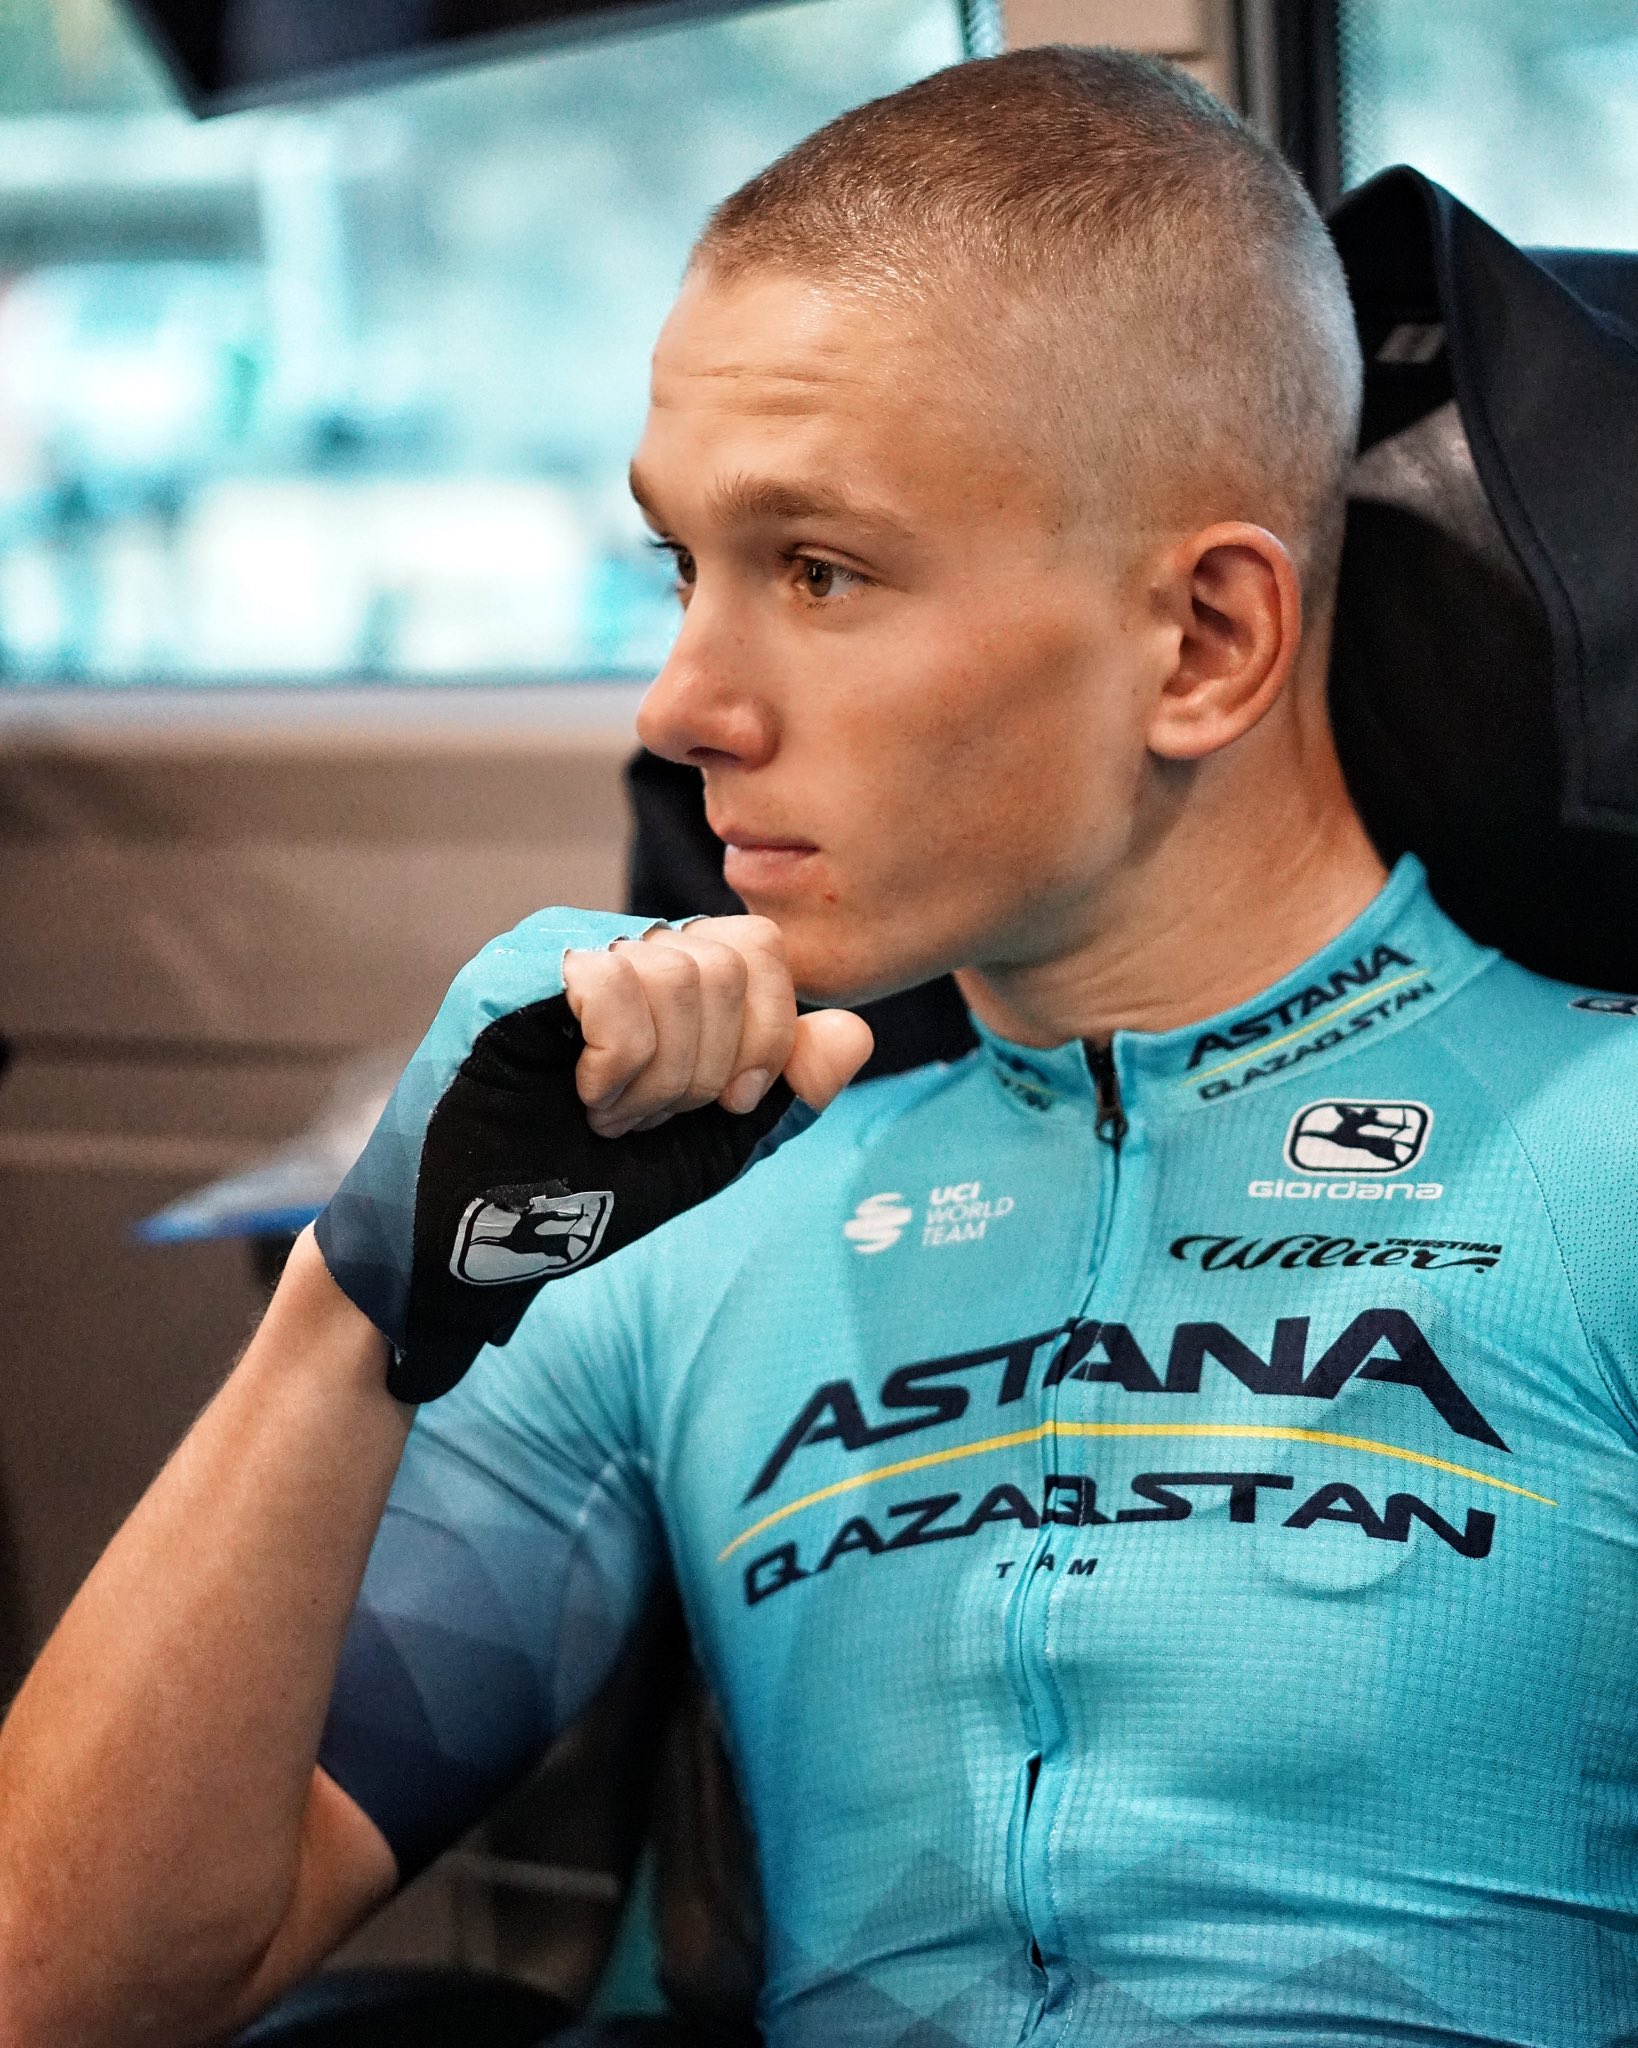 Astana Qazaqstan Team on Twitter: "🇪🇸 RACE: Shortly after the start 8 riders broke away clear to open a 2-minute gap to the peloton. Our Vadim Pronskiy makes Astana presence in